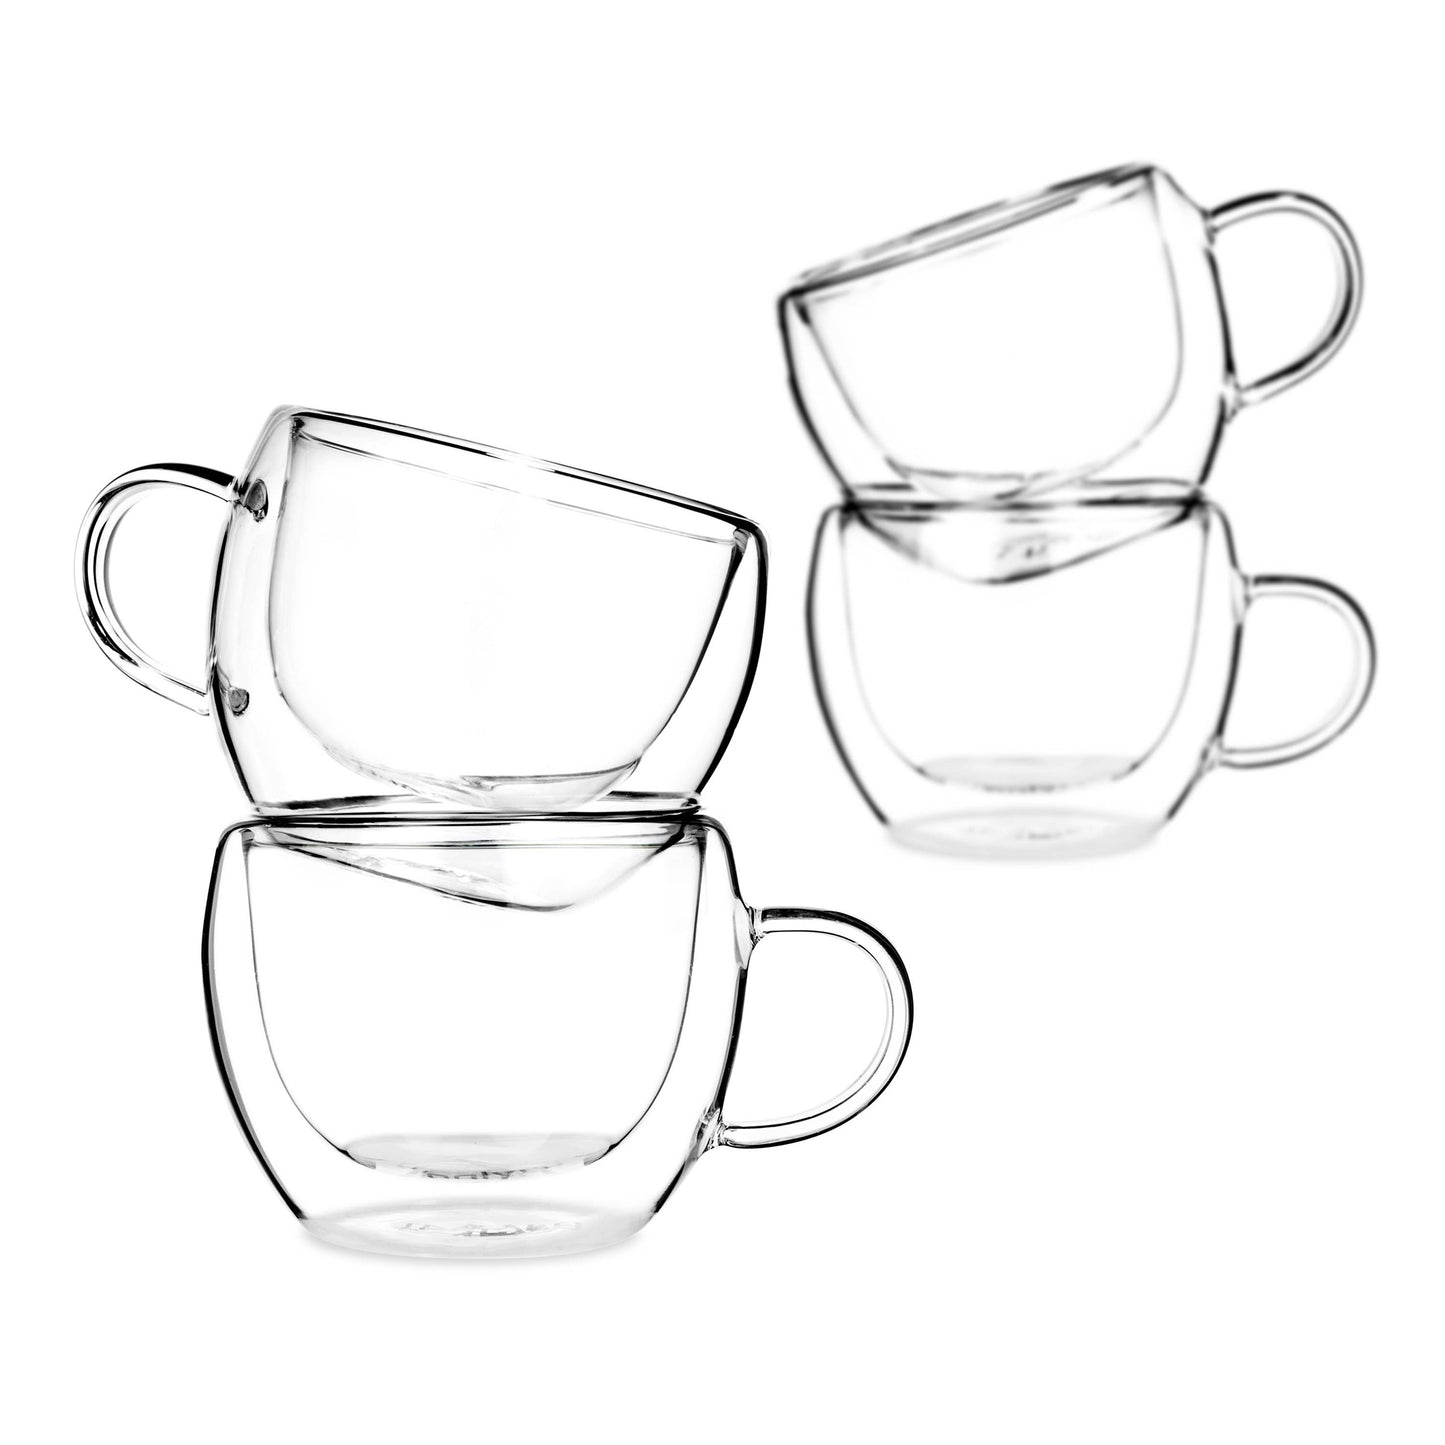 8oz Double Wall Glasses - Set of 4